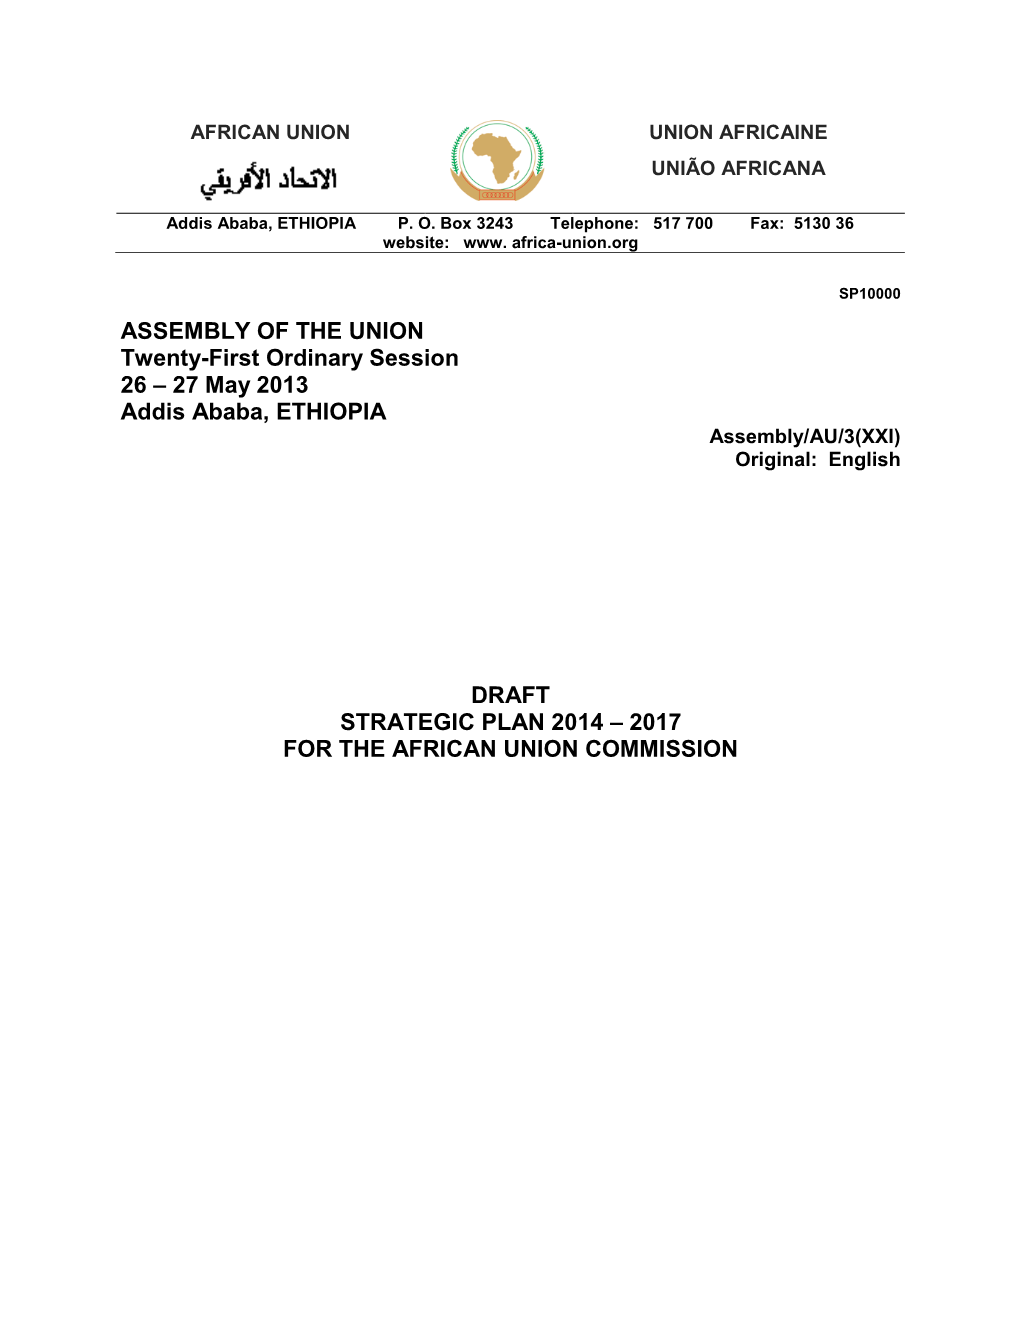 Draft Strategic Plan 2014 – 2017 for the African Union Commission